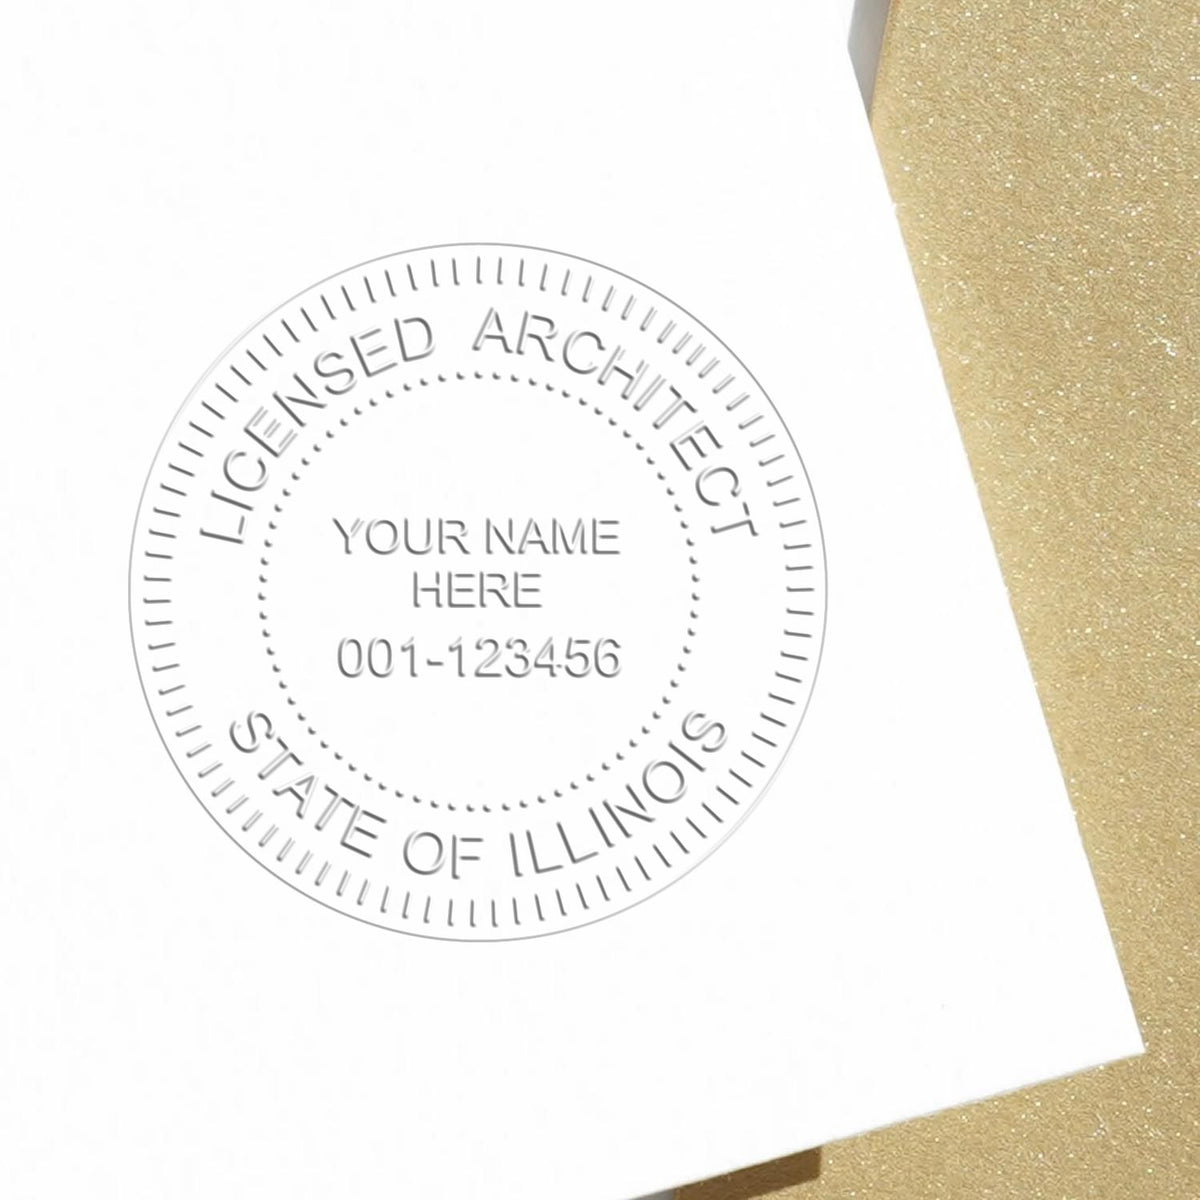 A stamped impression of the Illinois Desk Architect Embossing Seal in this stylish lifestyle photo, setting the tone for a unique and personalized product.